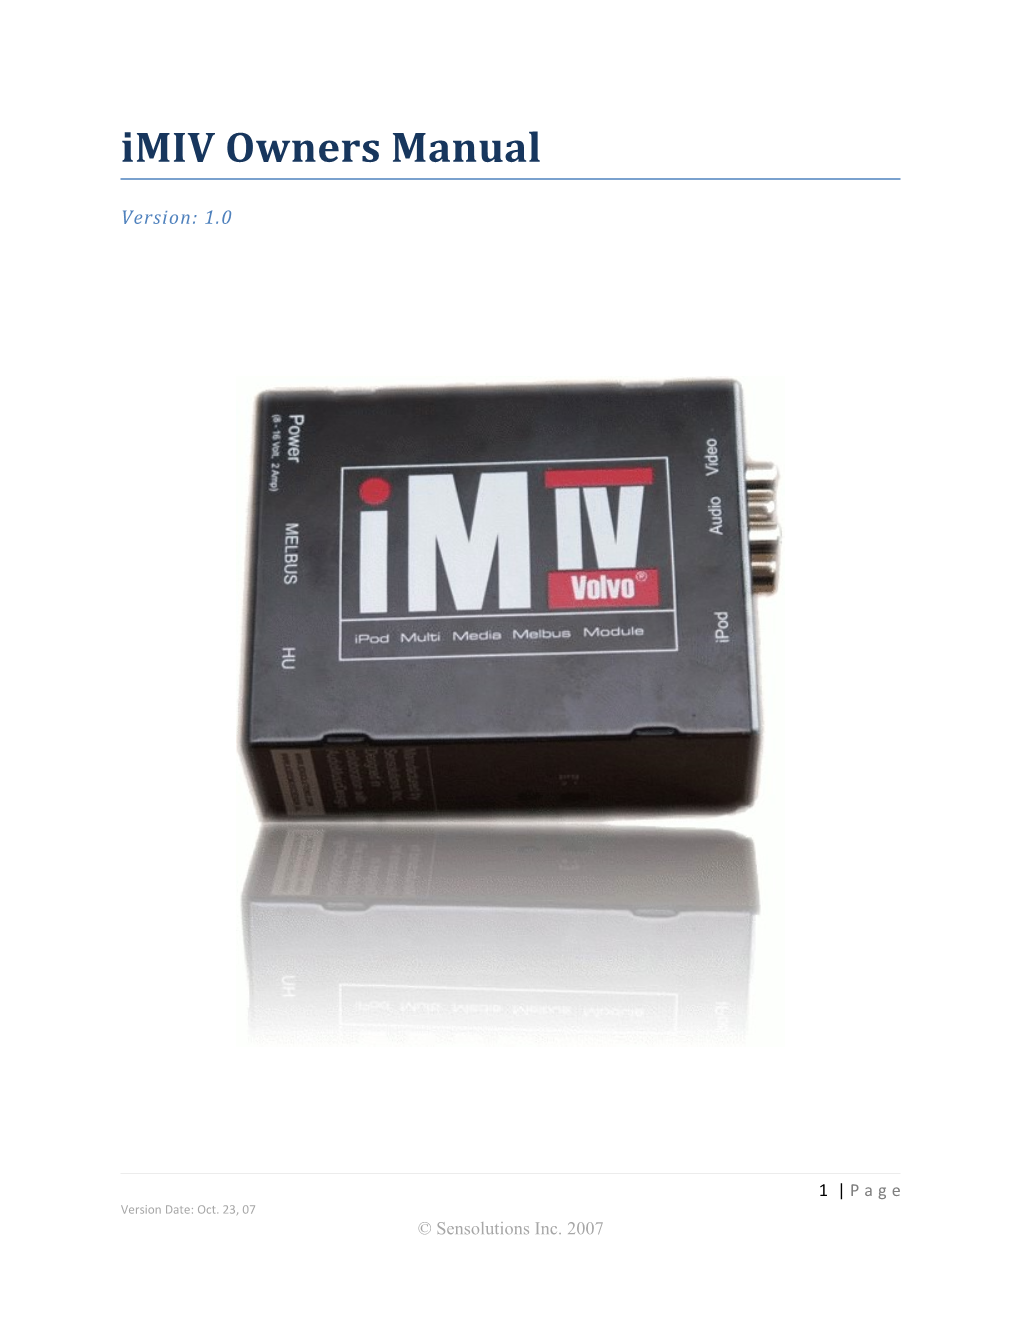 Imiv Owners Manual